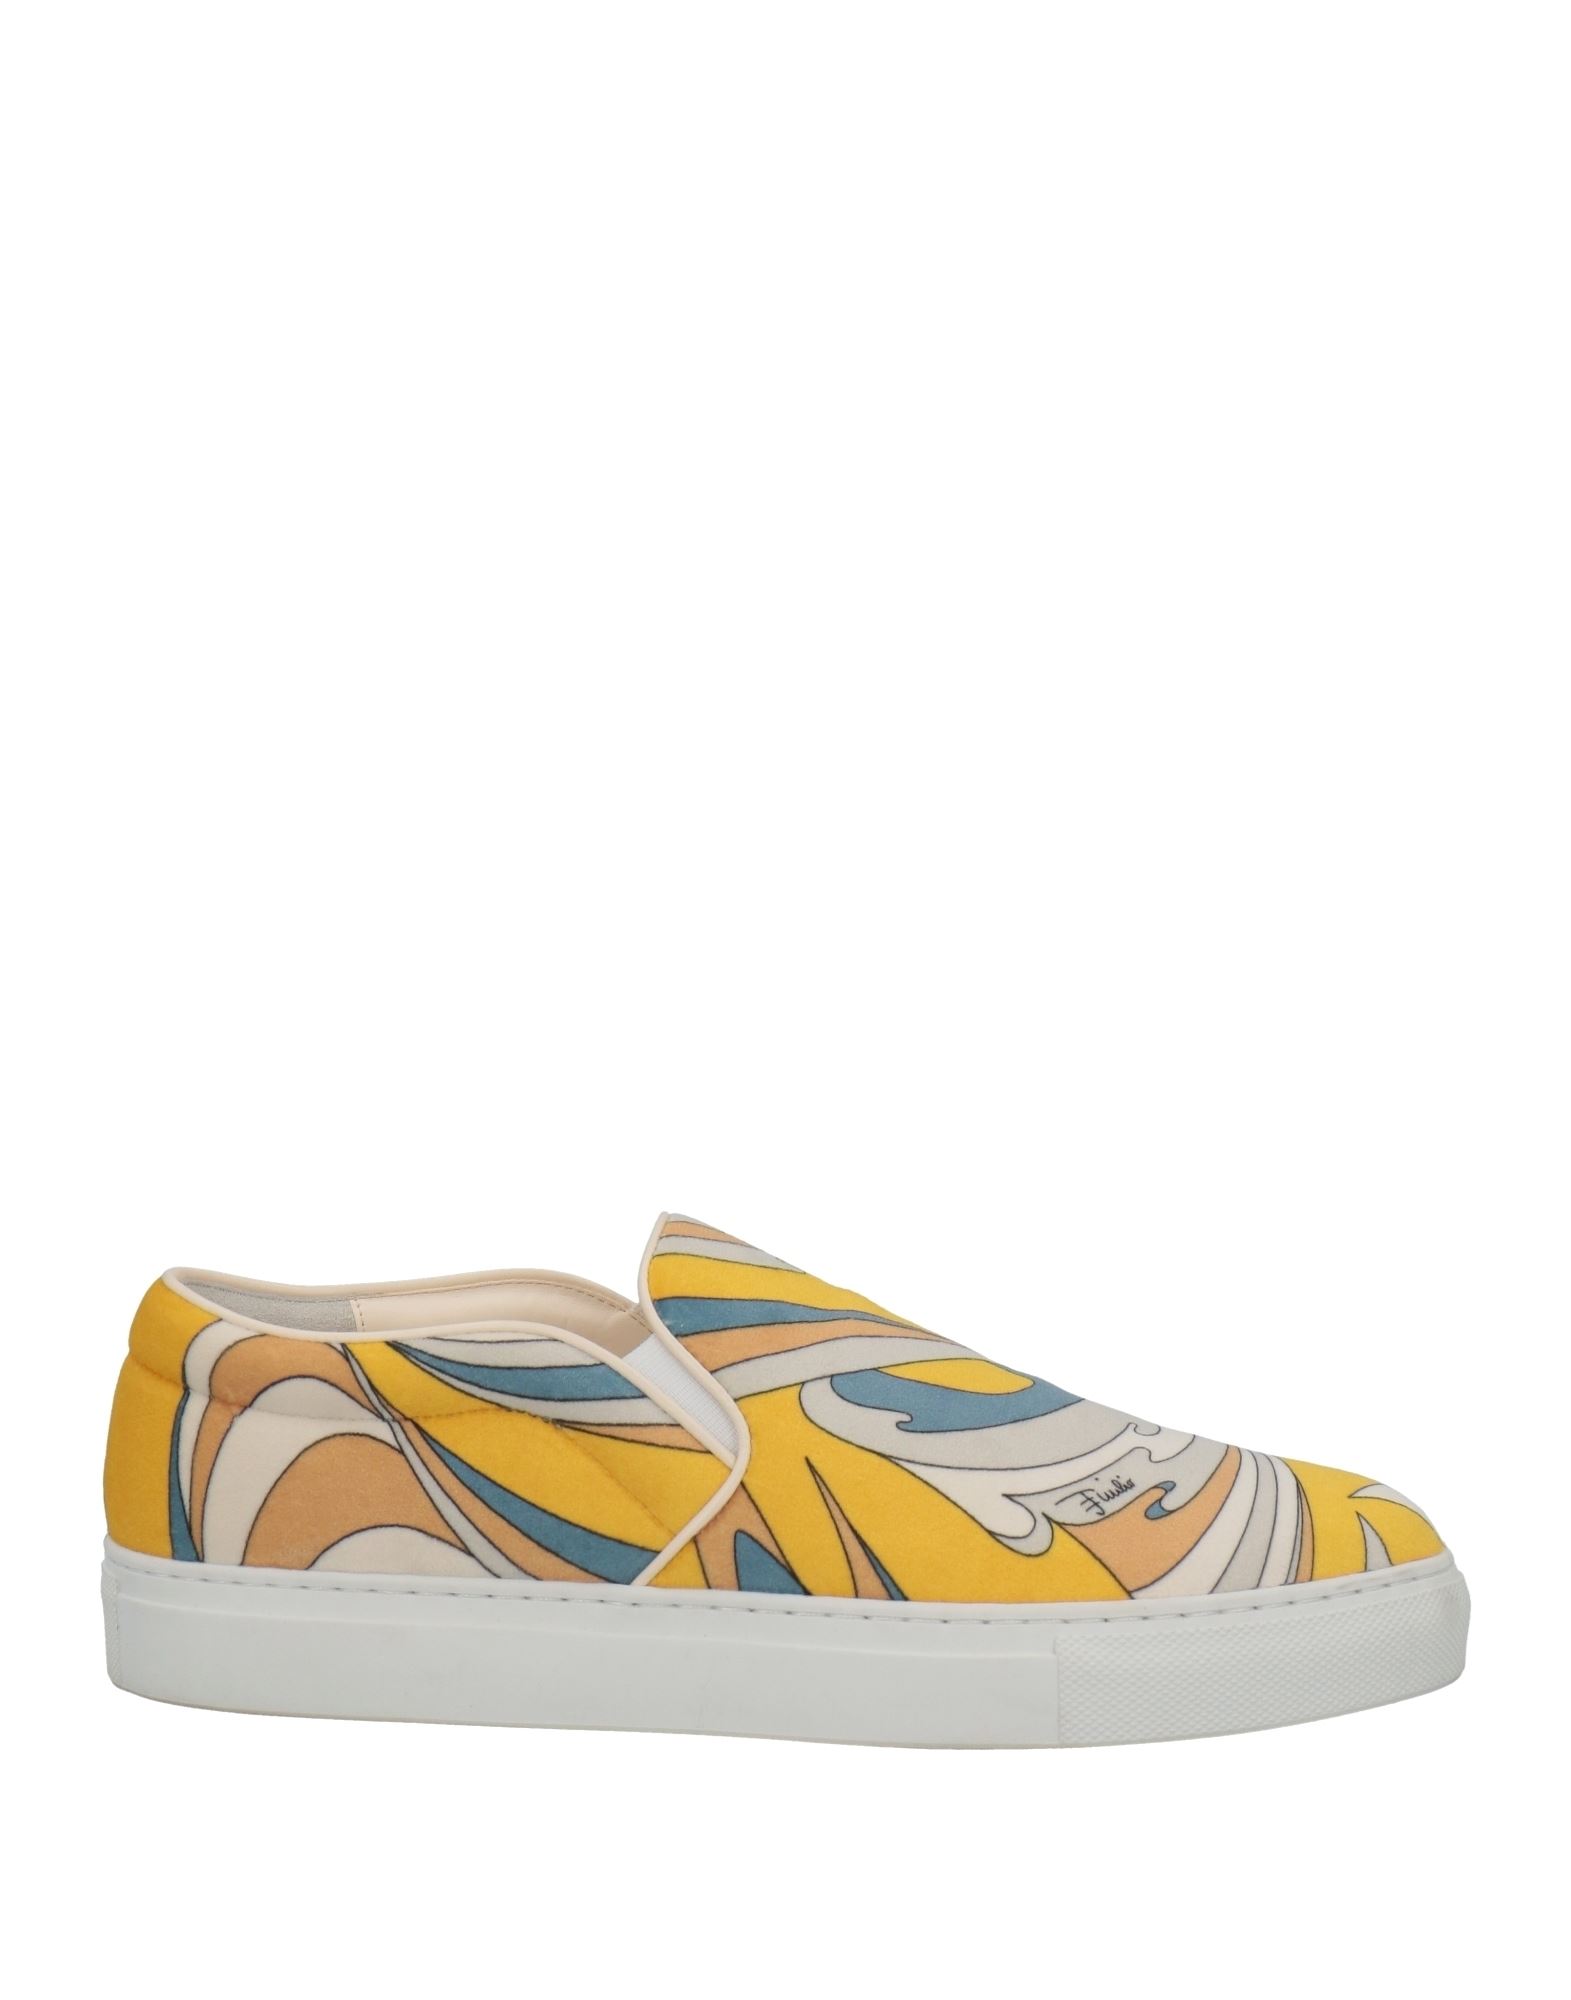 Emilio Pucci Sneakers In Yellow